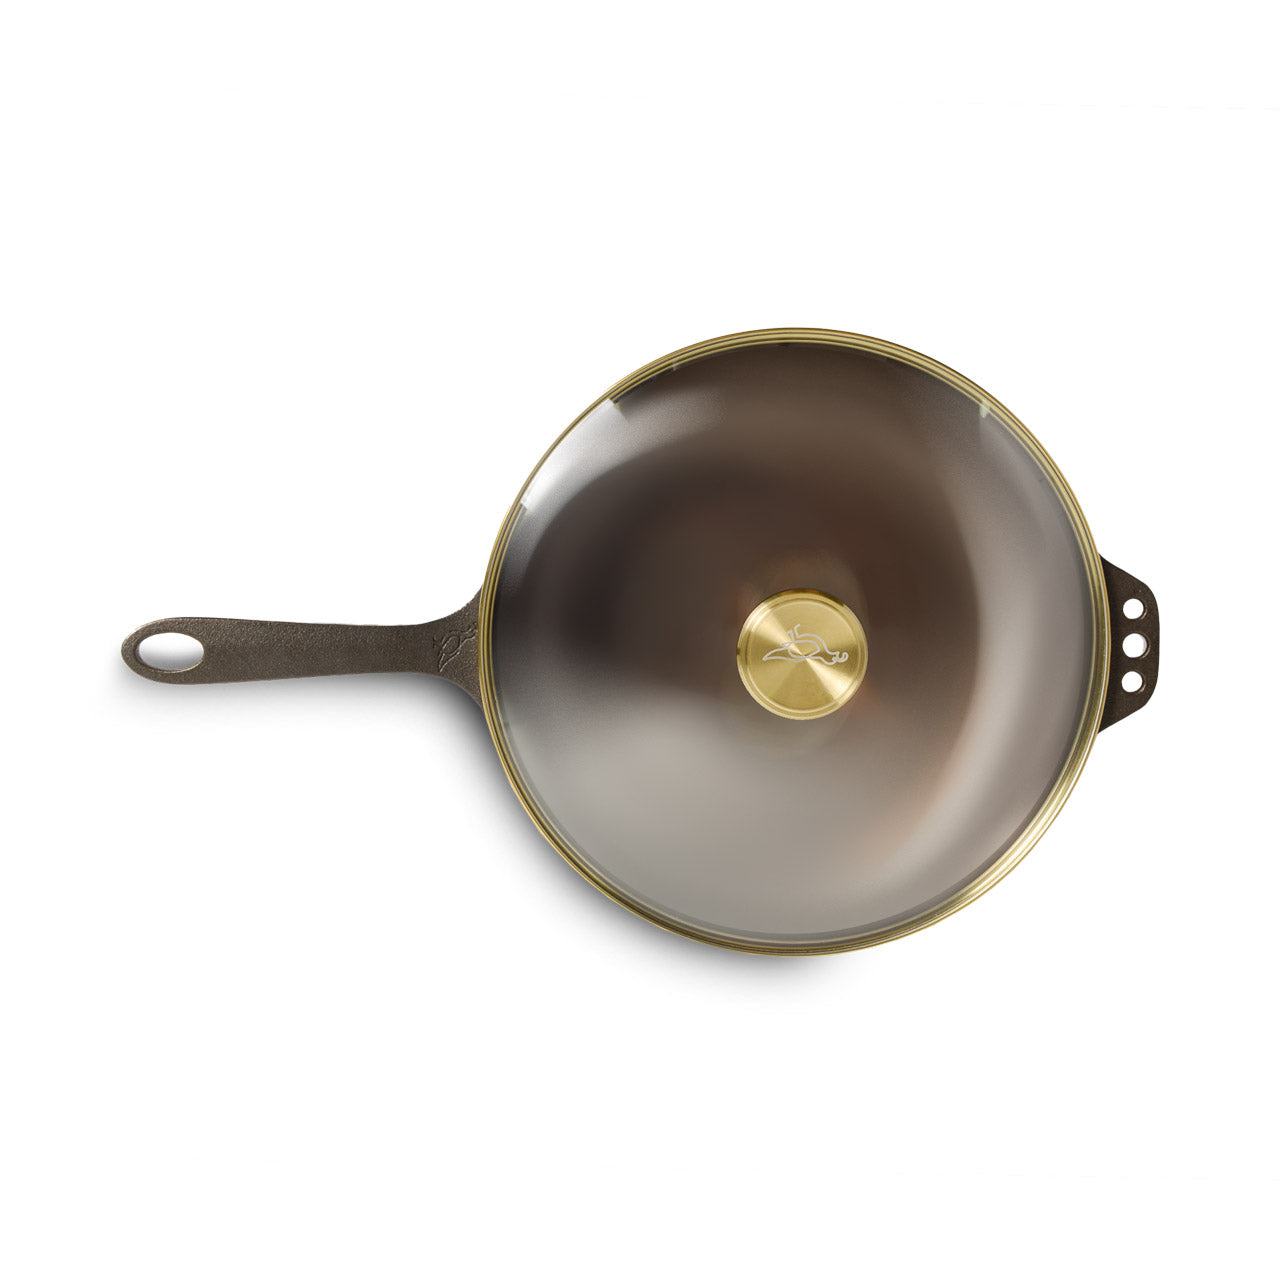 Would you pay $160 for this cast iron pan (Smithey Ironware